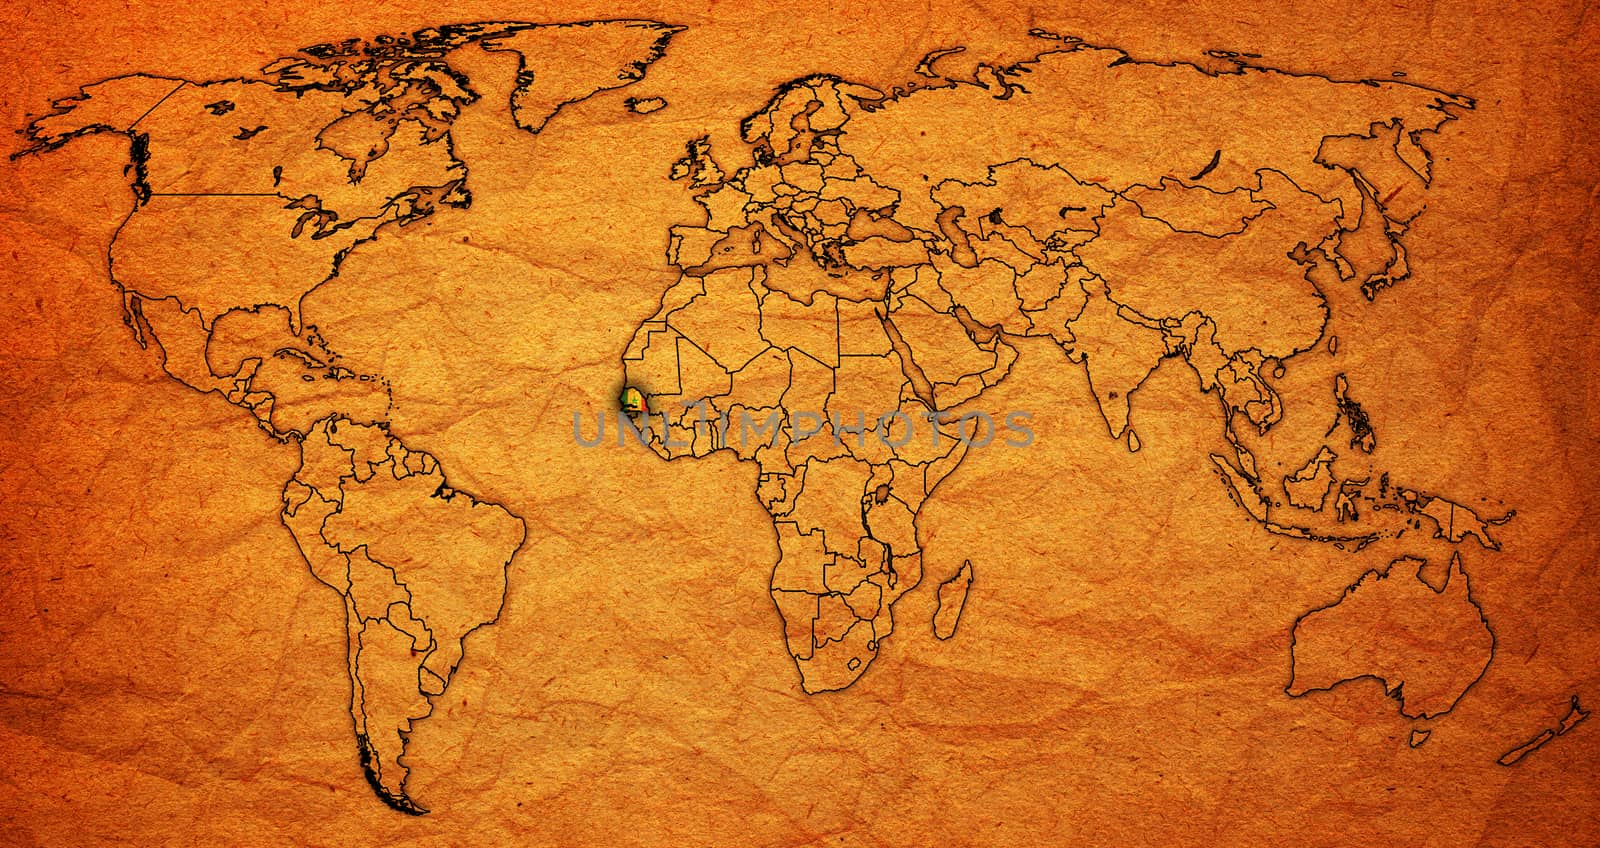 senegal territory on world map by michal812